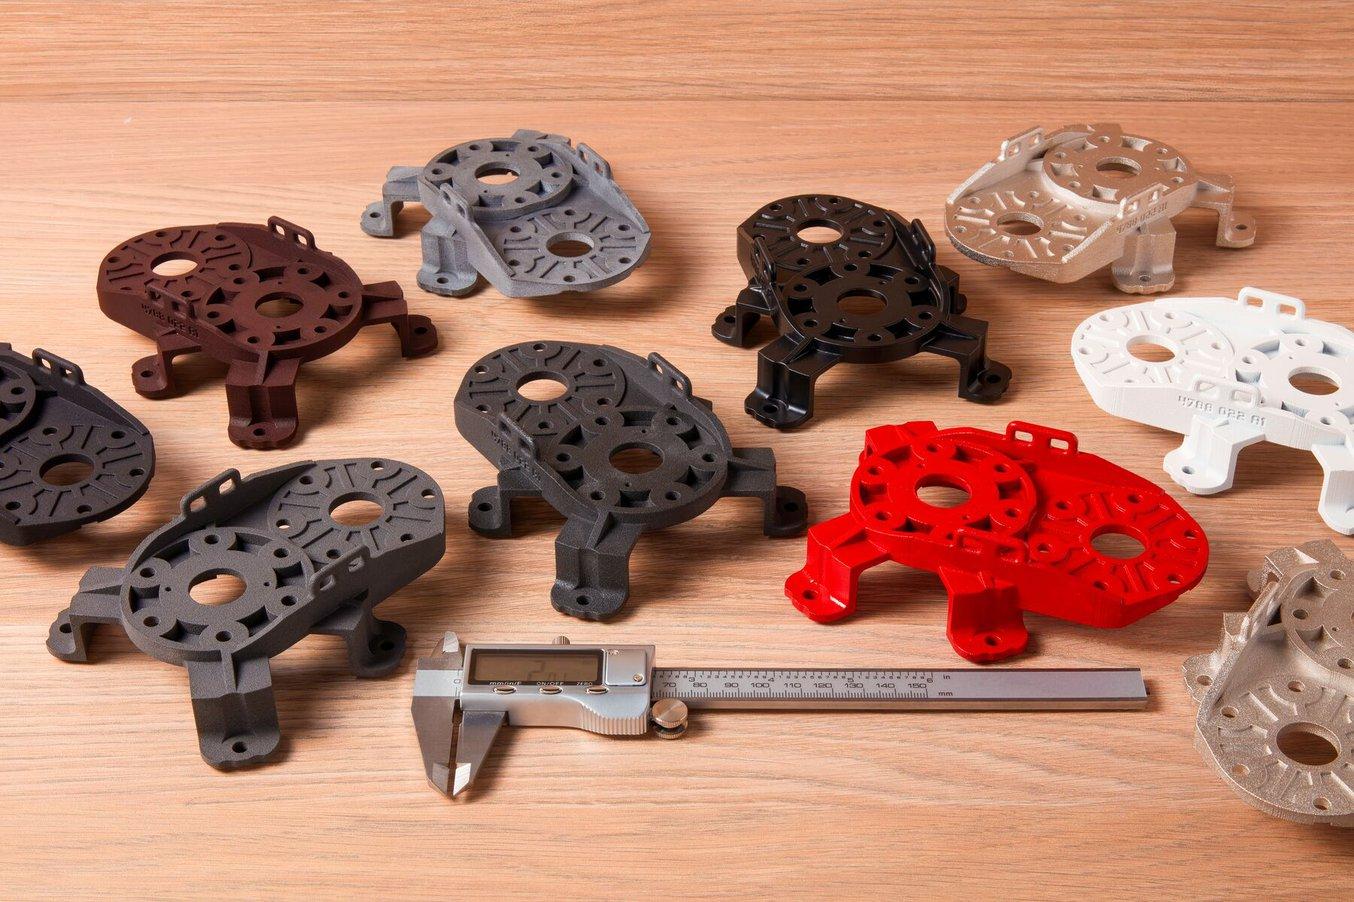 Nine copies of a 3D printed differential swerve drive top plate, each with a different finishing technique.